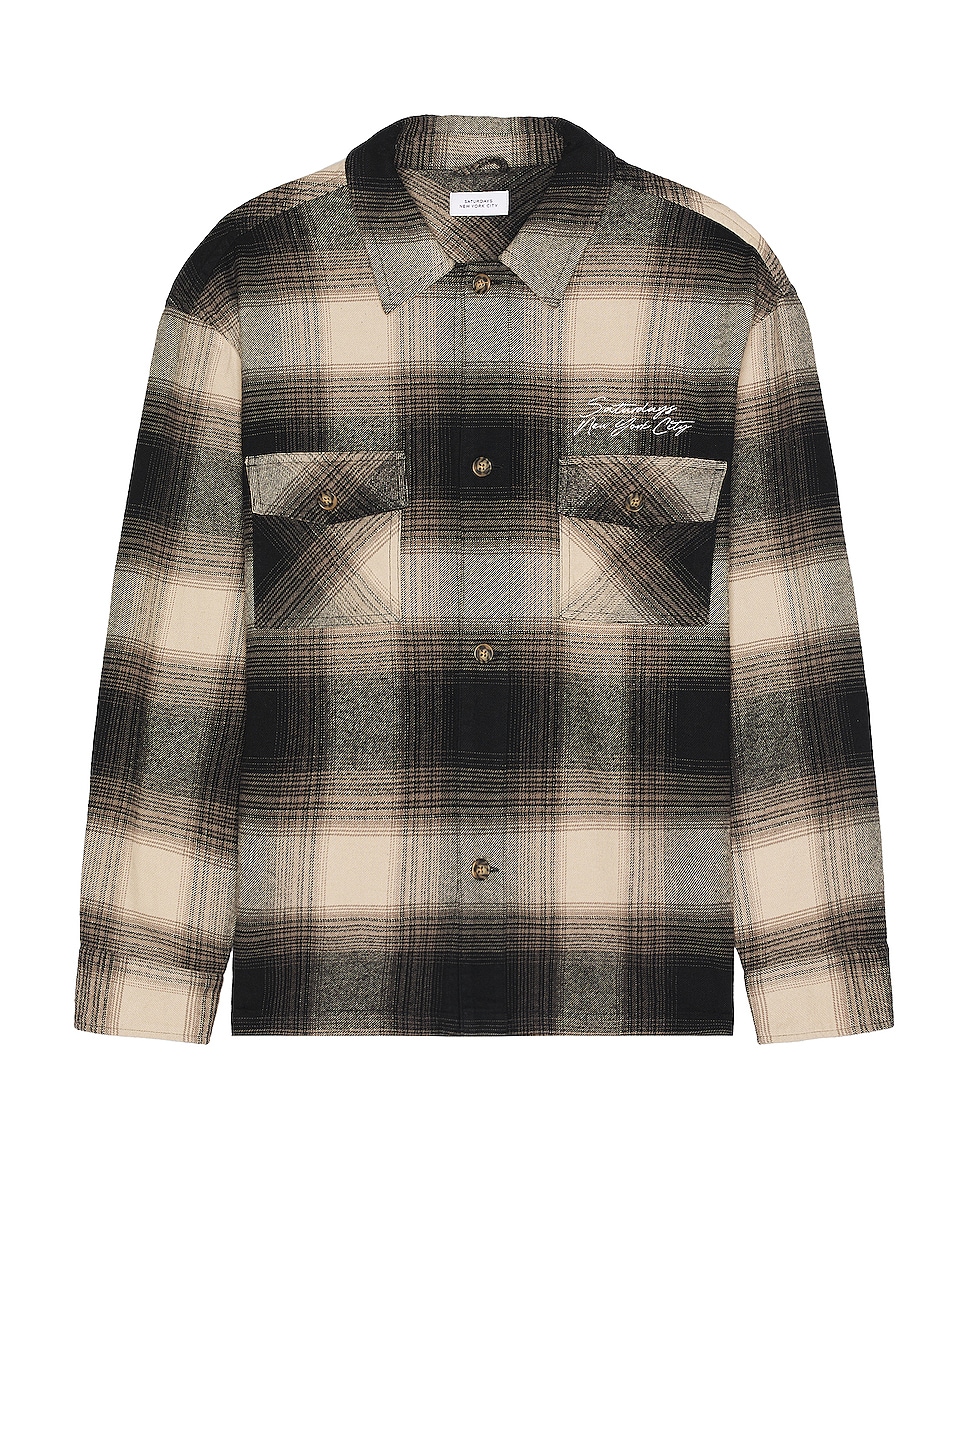 Image 1 of SATURDAYS NYC Driessen Flannel Overshirt in Bungee